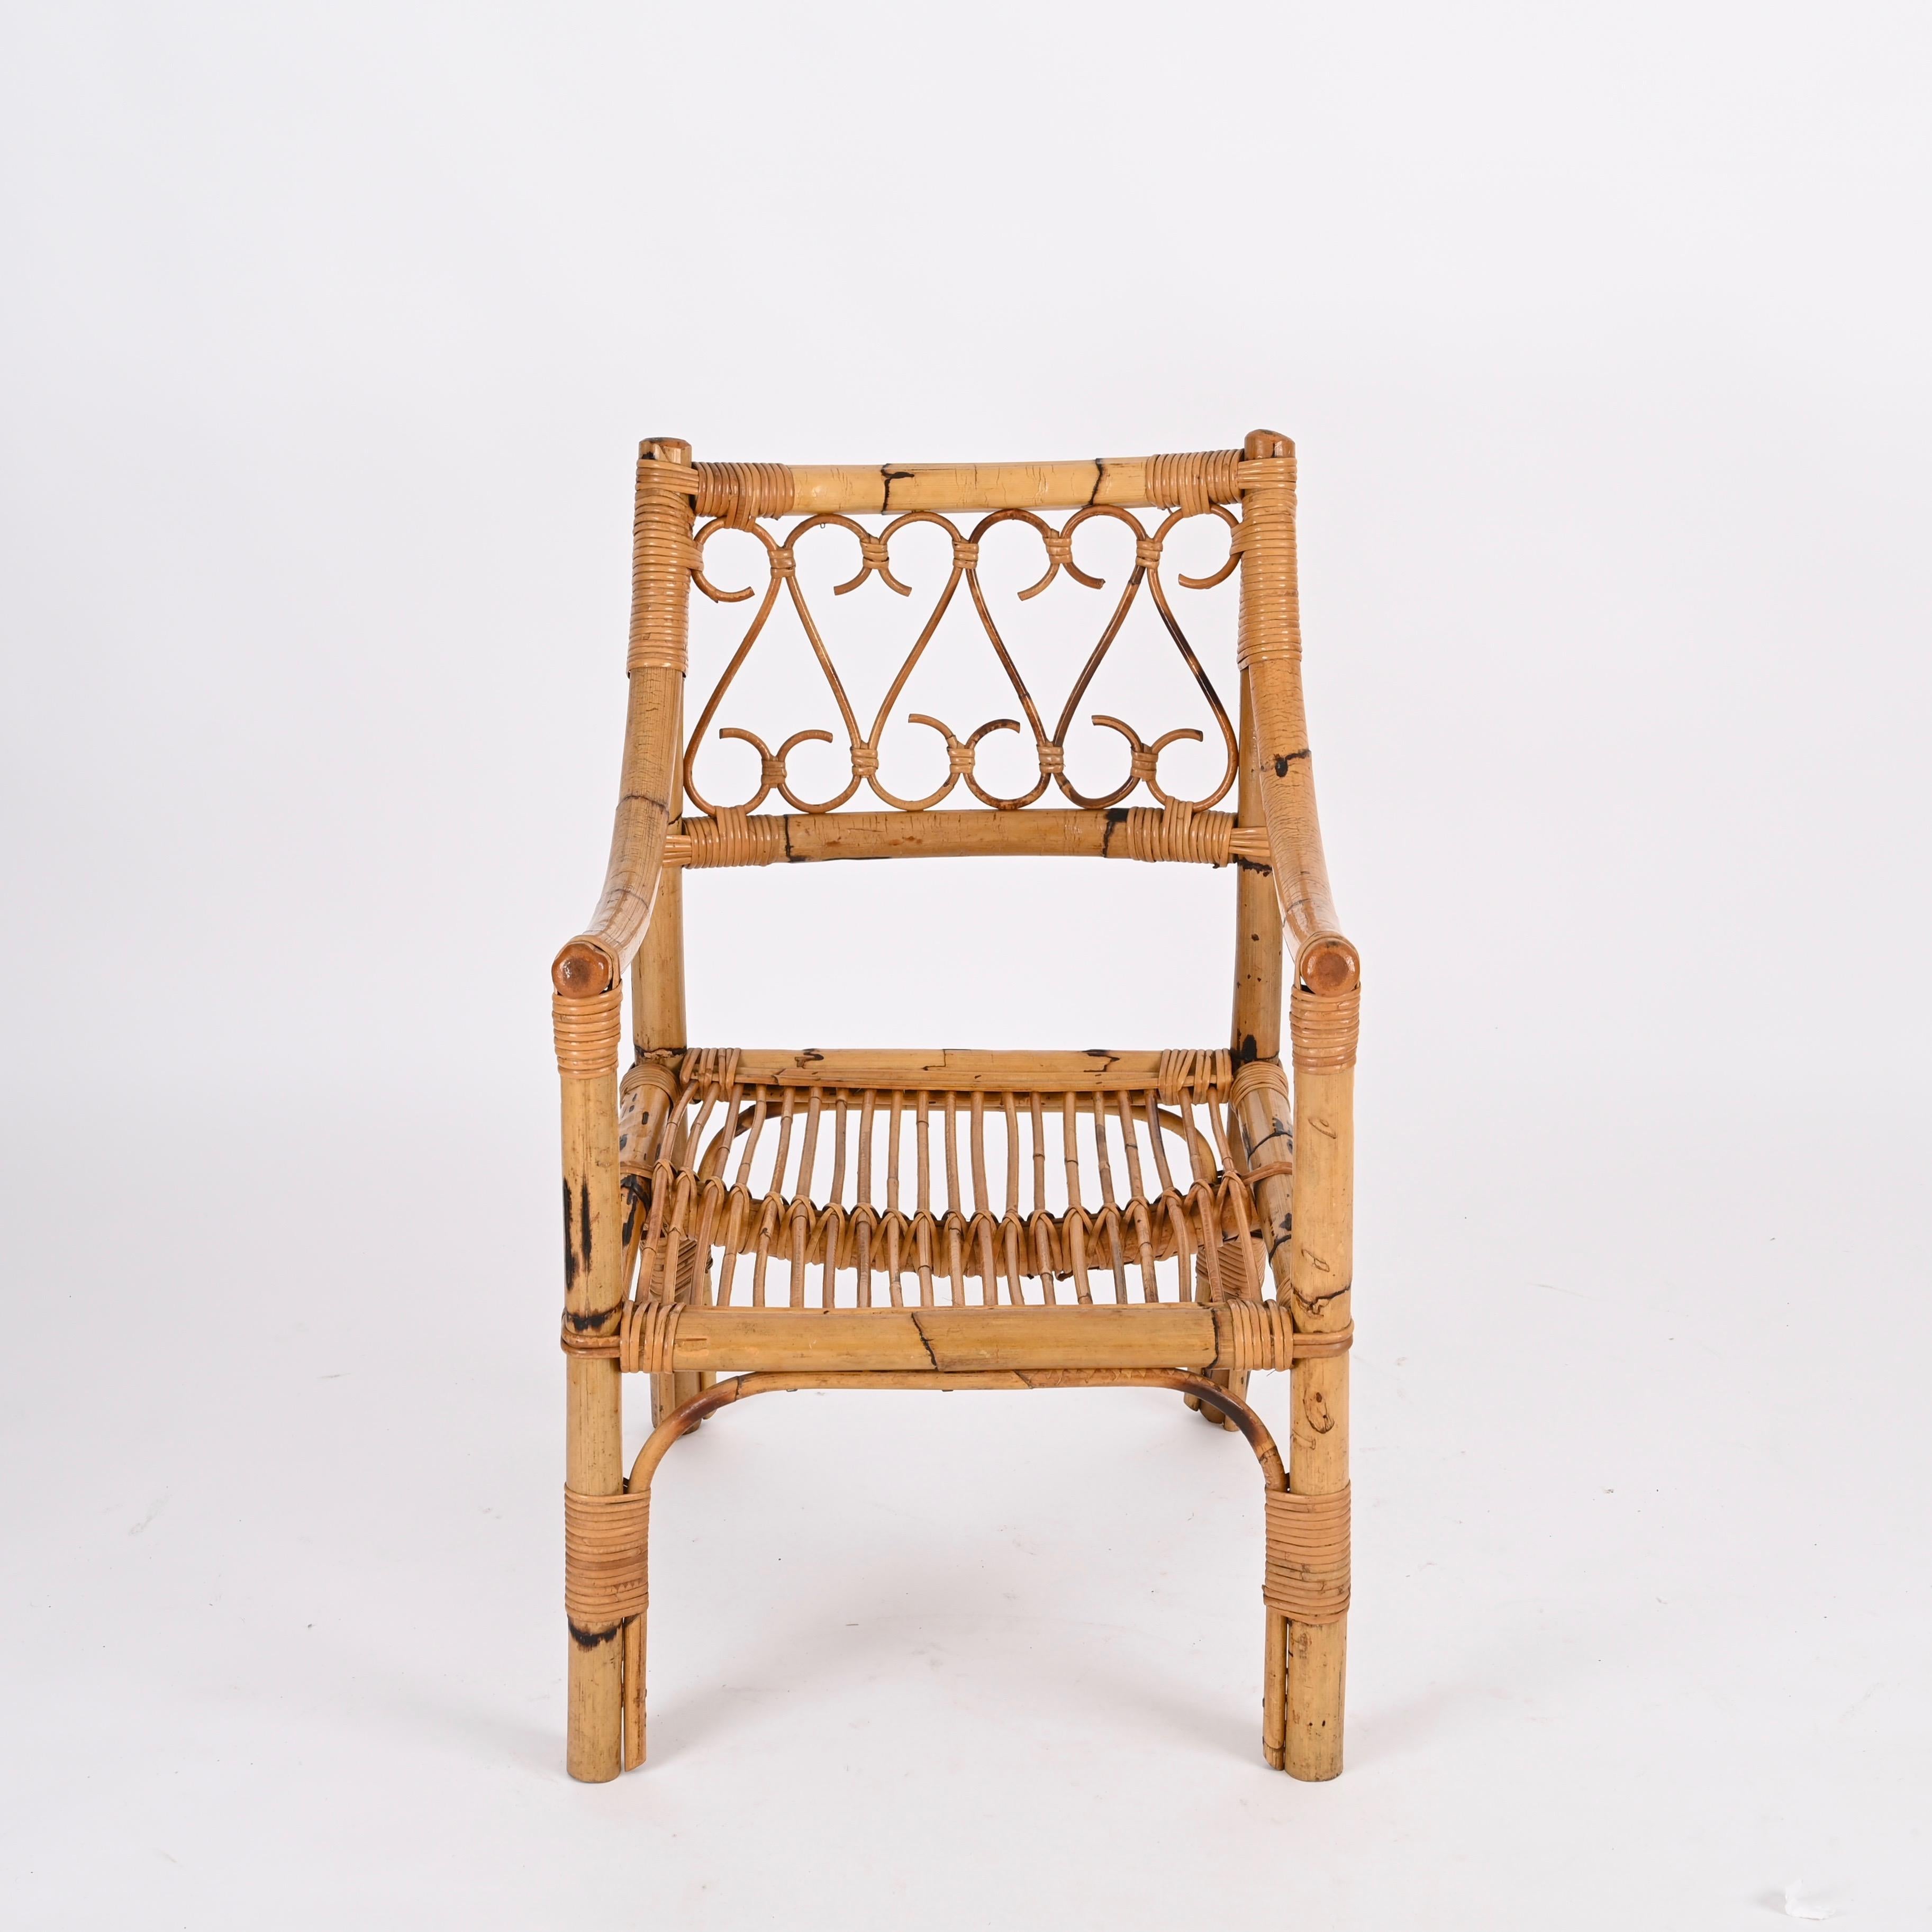 Pair of Vivai del Sud Mid-Century Armchairs in Bamboo and Rattan, Italy 1970s For Sale 2